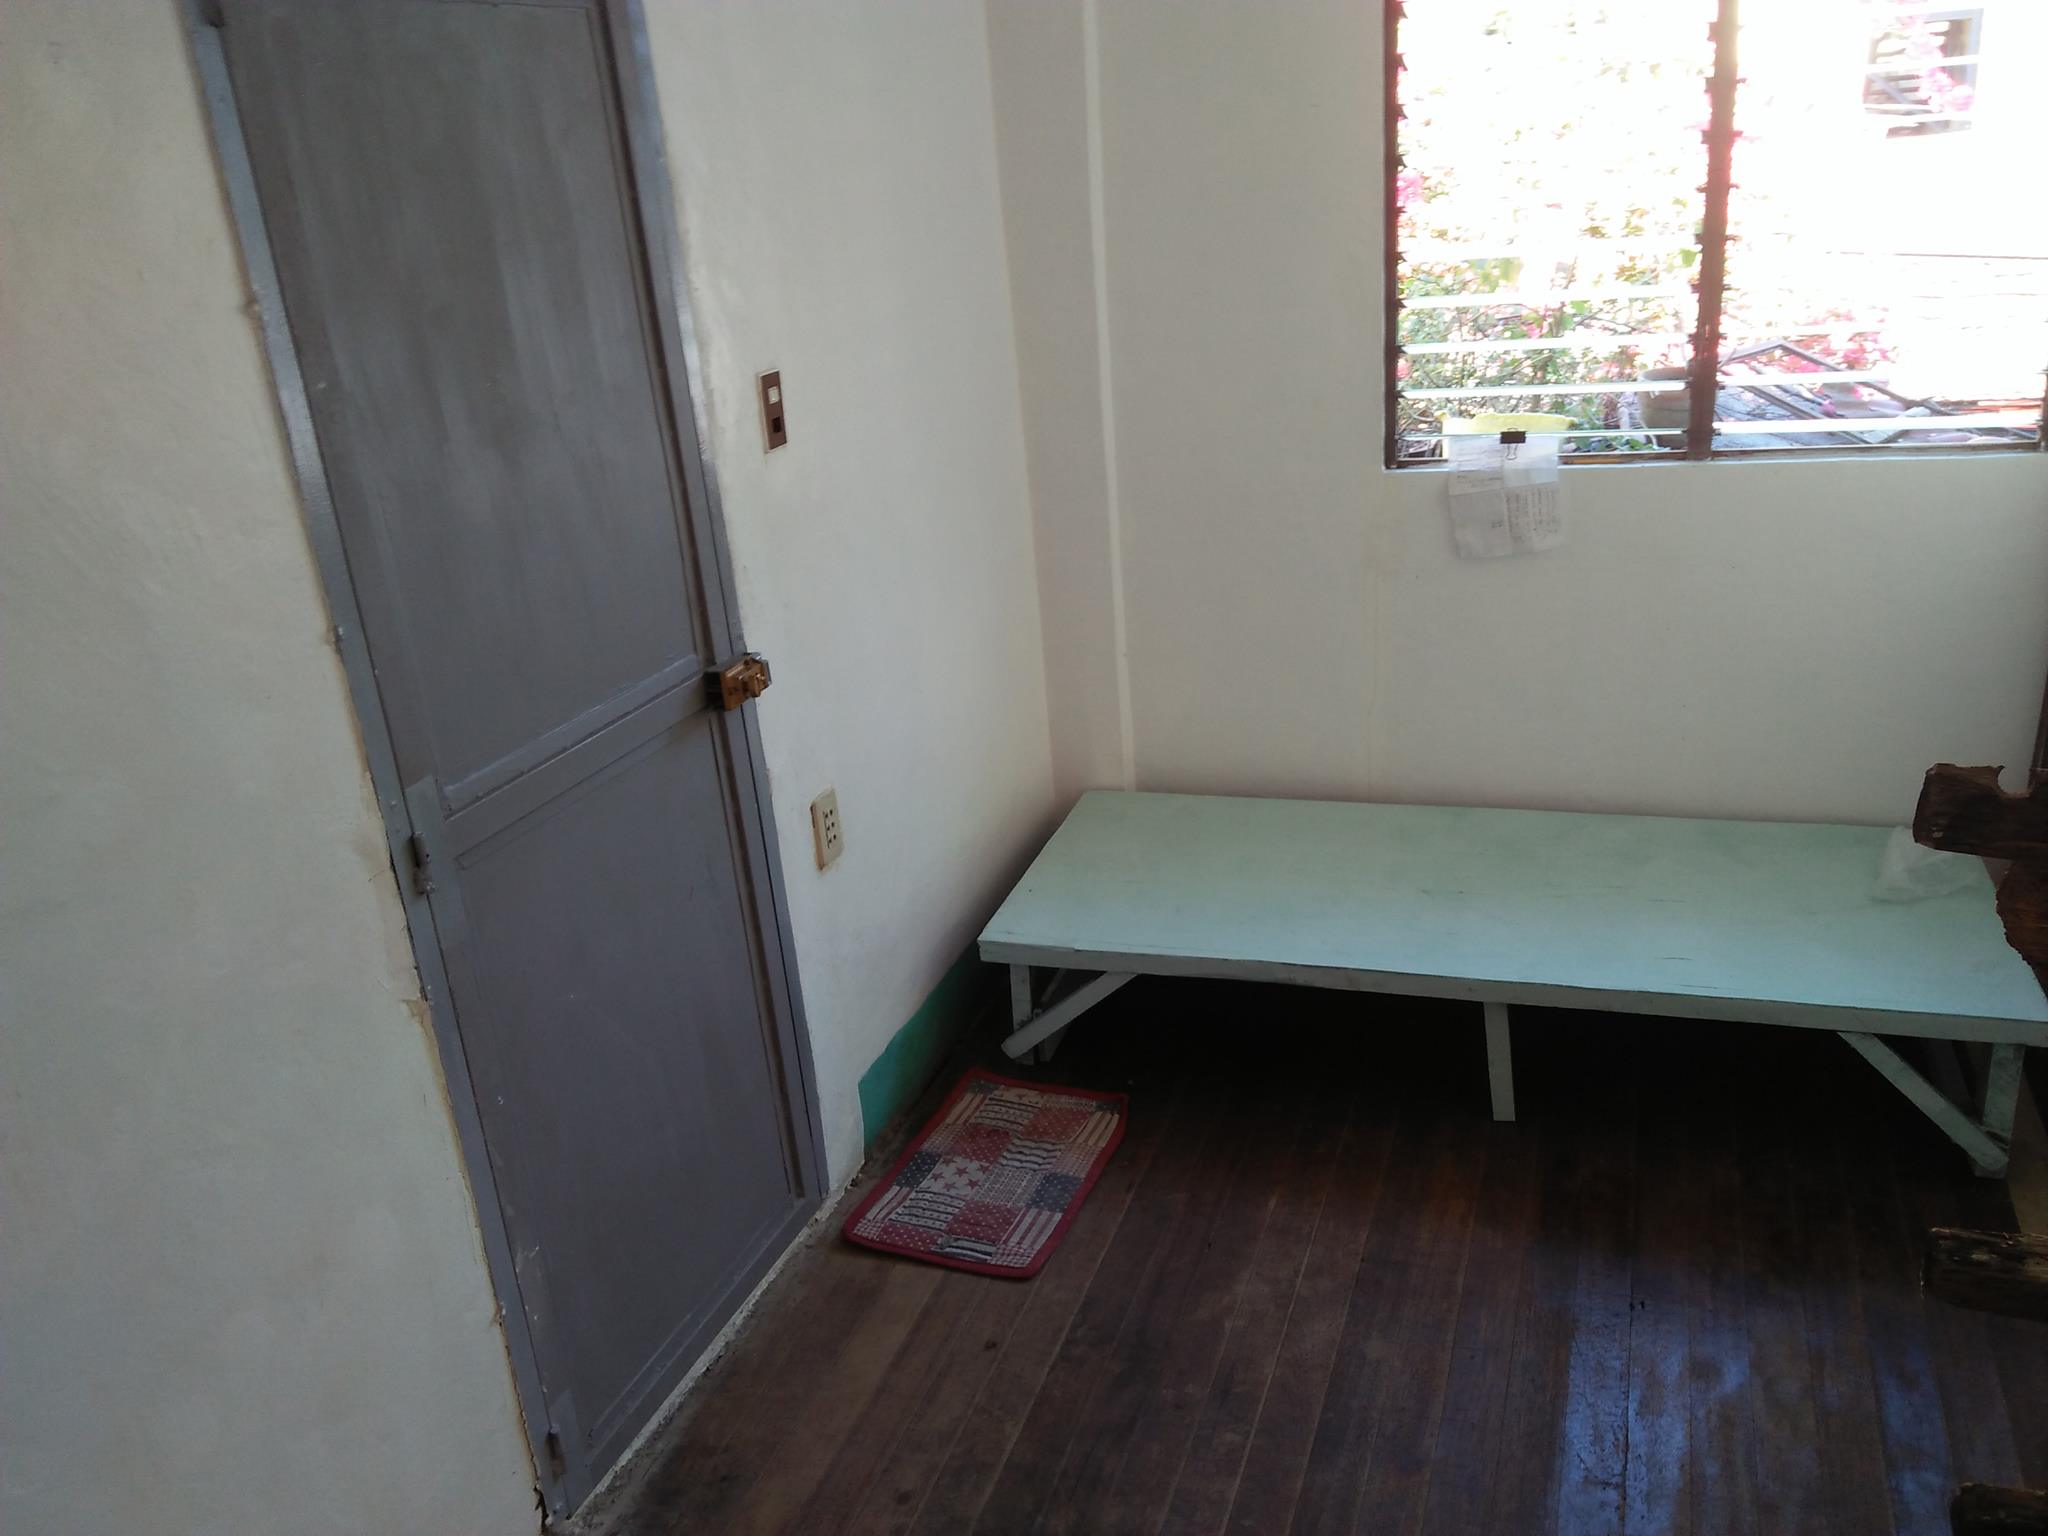 House for Rent in Quezon City 5000 Only!